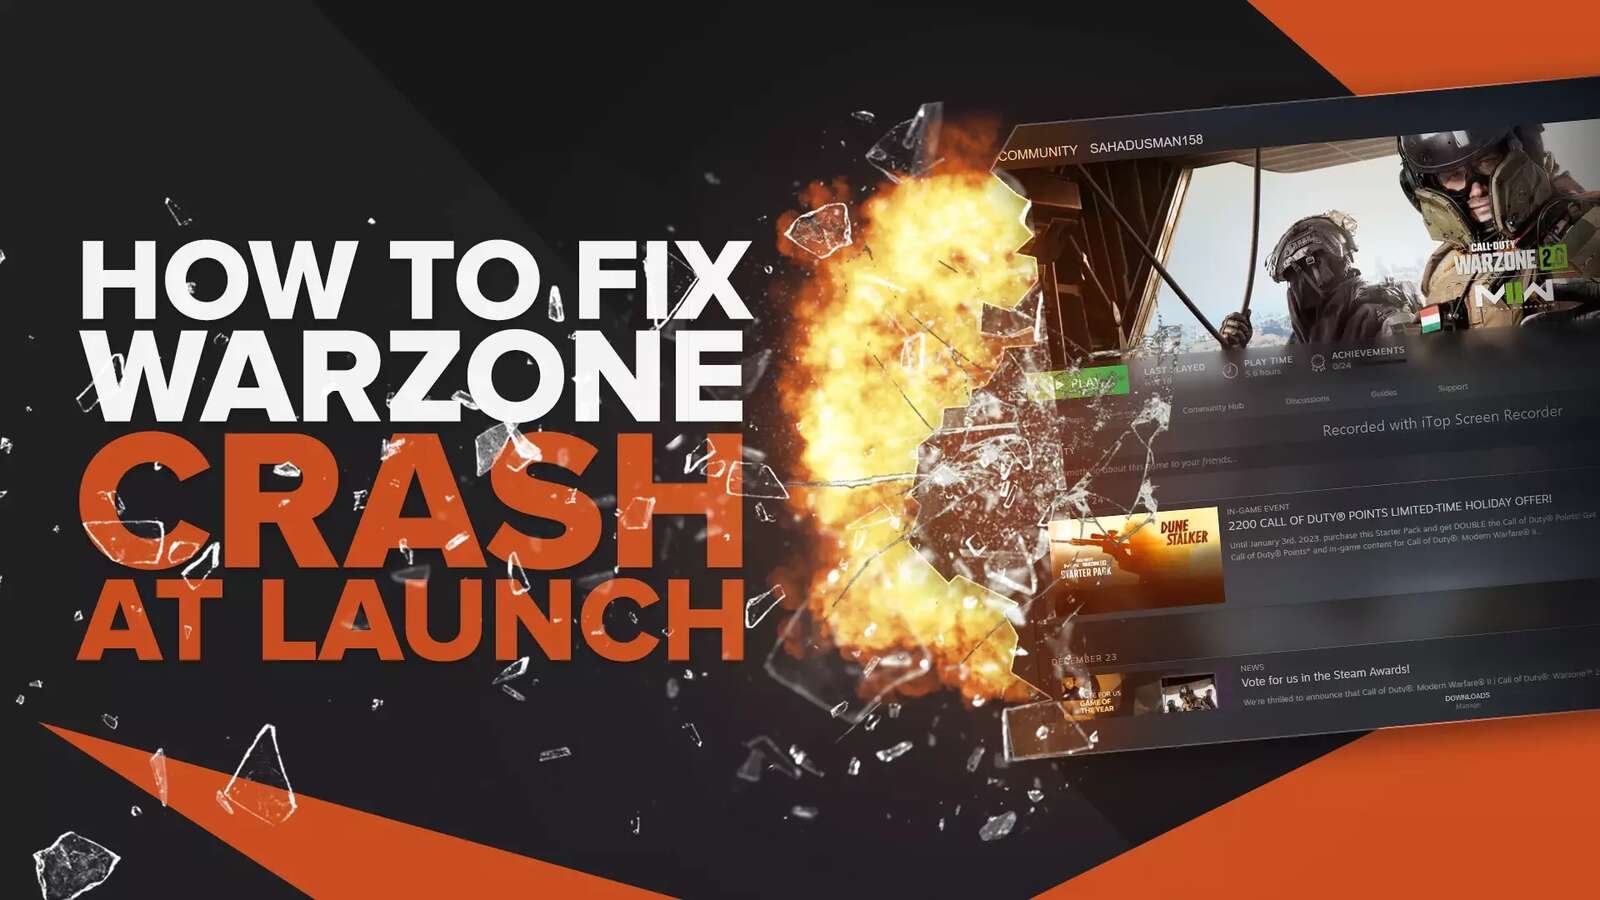 How Do I Fix The Call Of Duty Warzone Crash-at-launch Issue on PC?